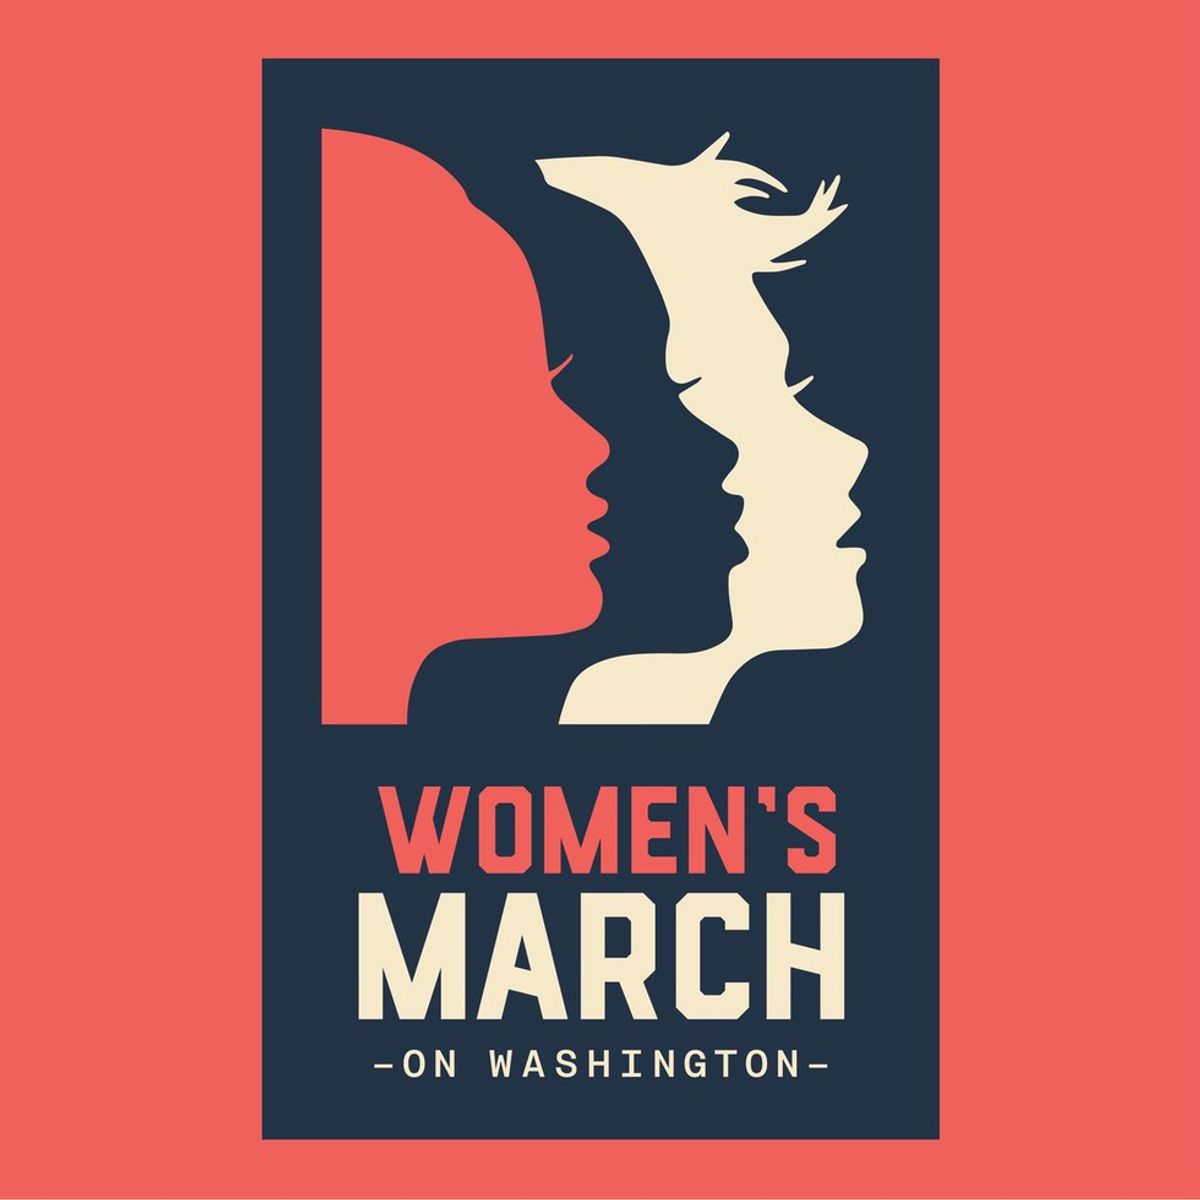 What You Need To Know About The Women's March On Washington